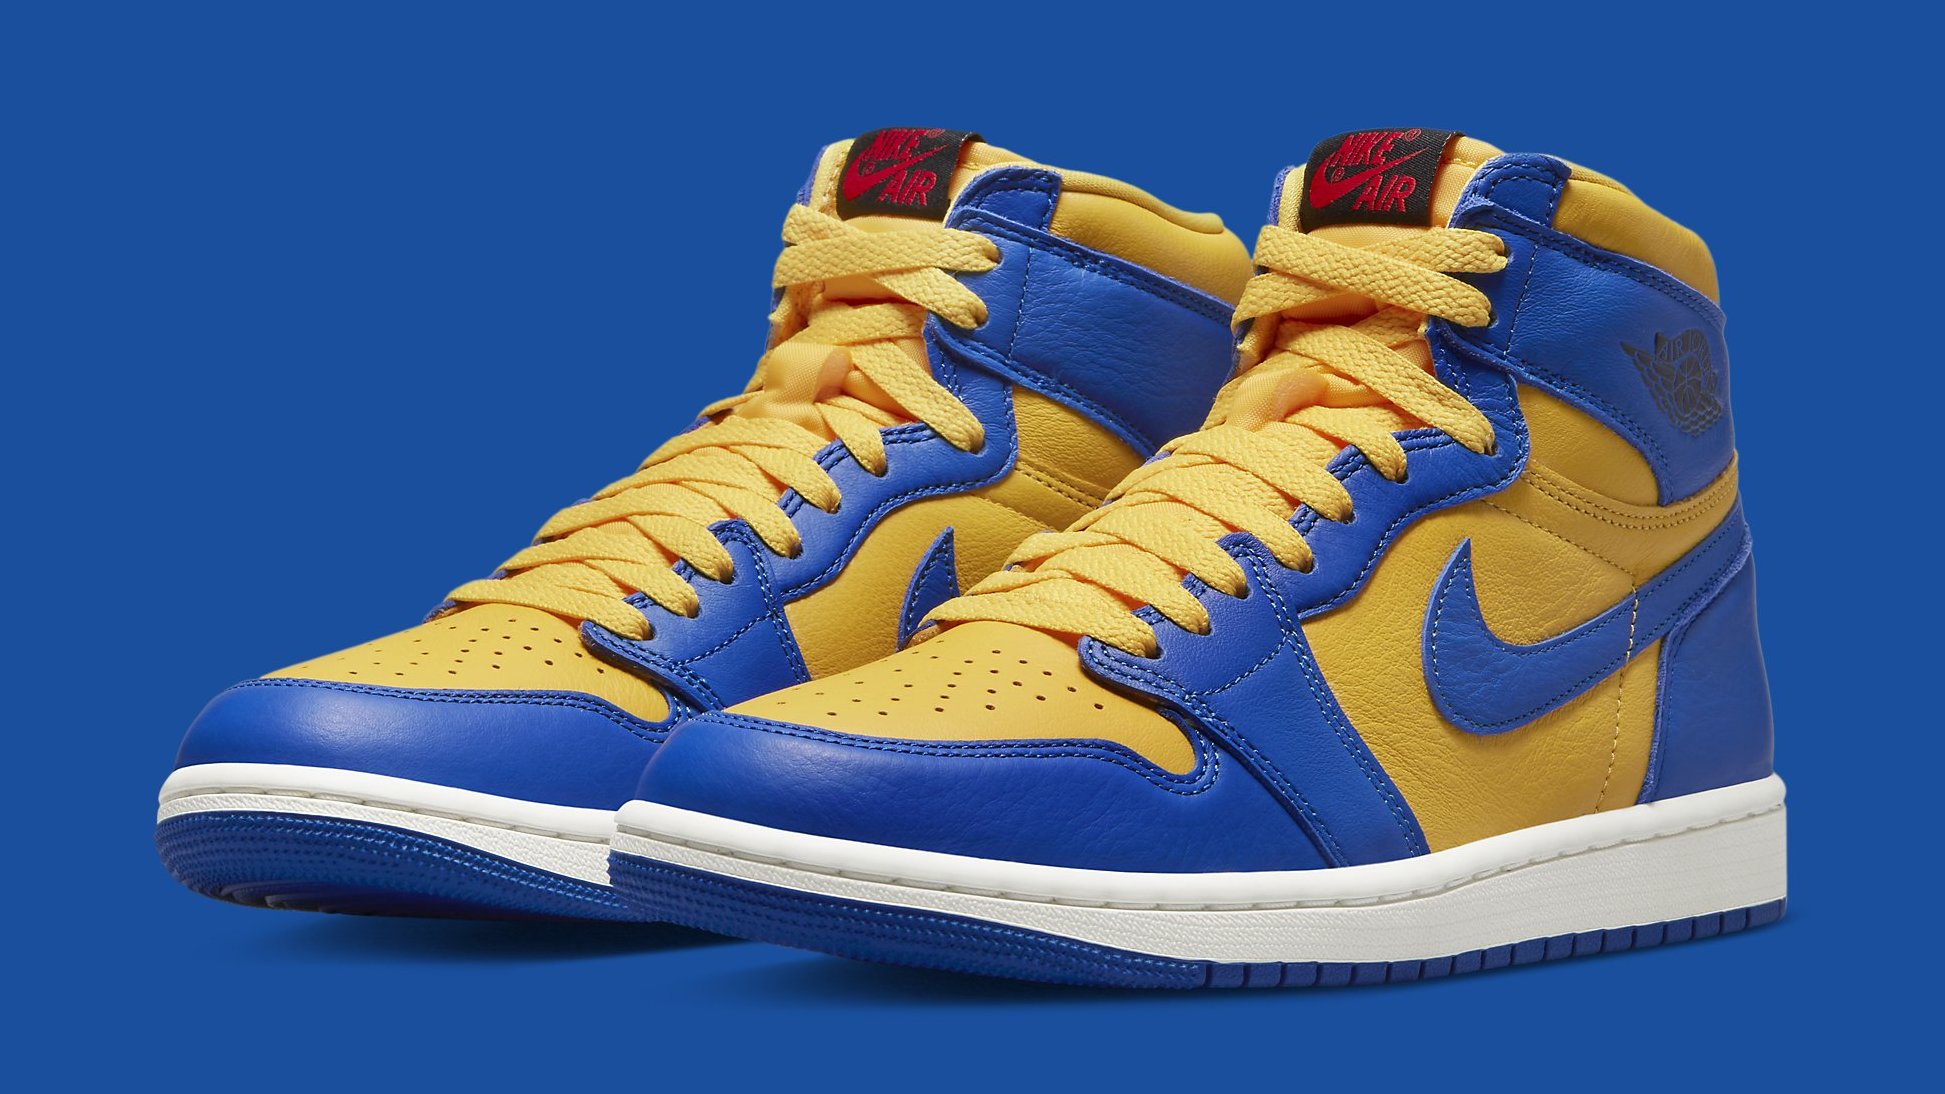 blue and yellow jordans release date